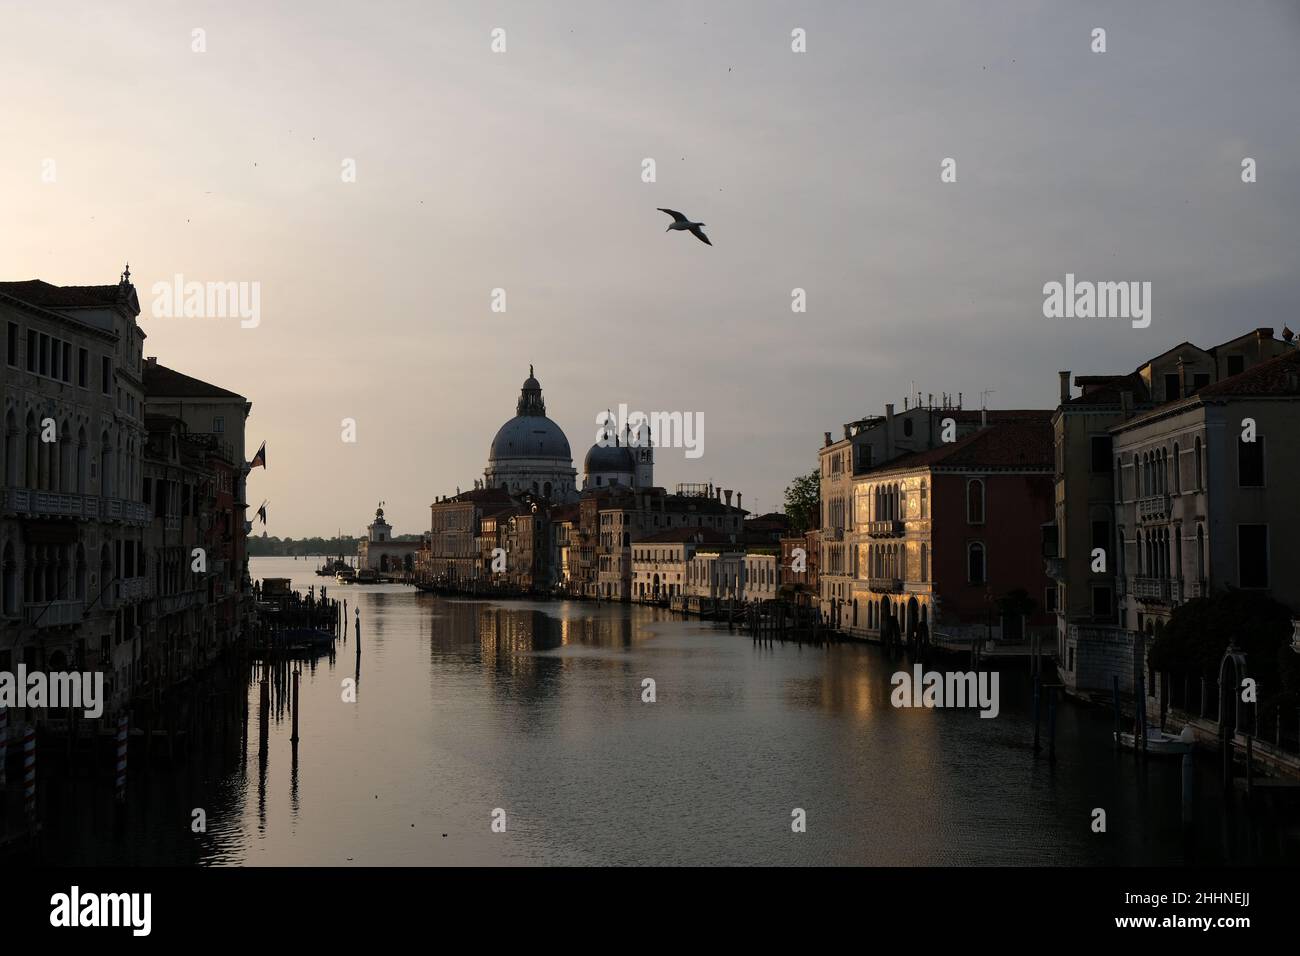 A general view of the Grand Canal in Venice Stock Photo